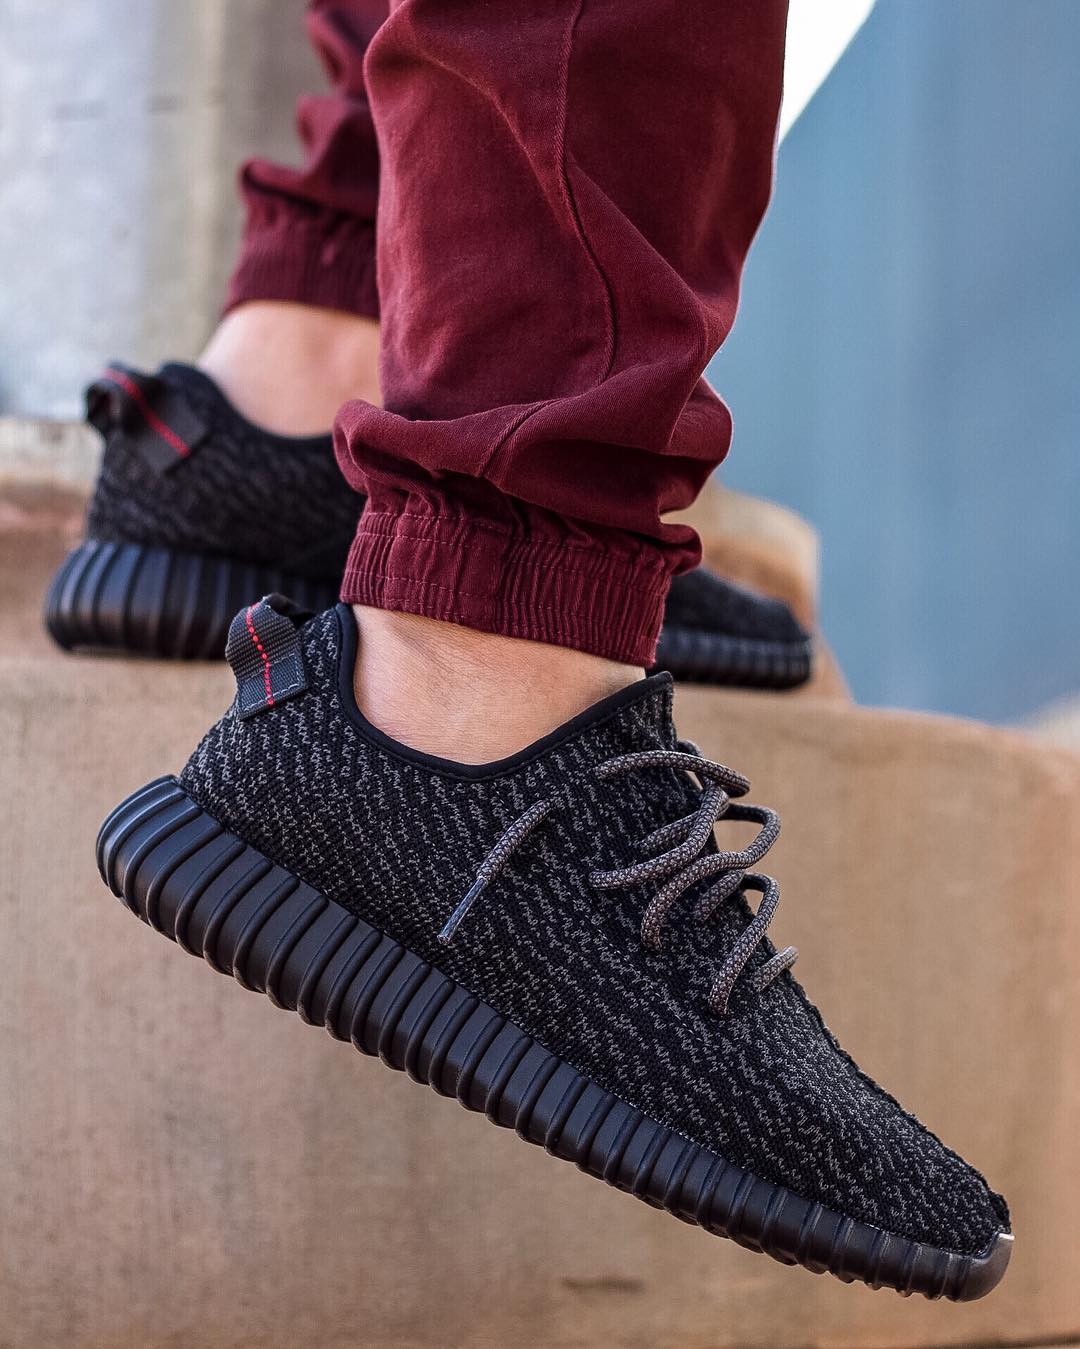 adidas Yeezy Boost 350 &quot;Pirate Black&quot;